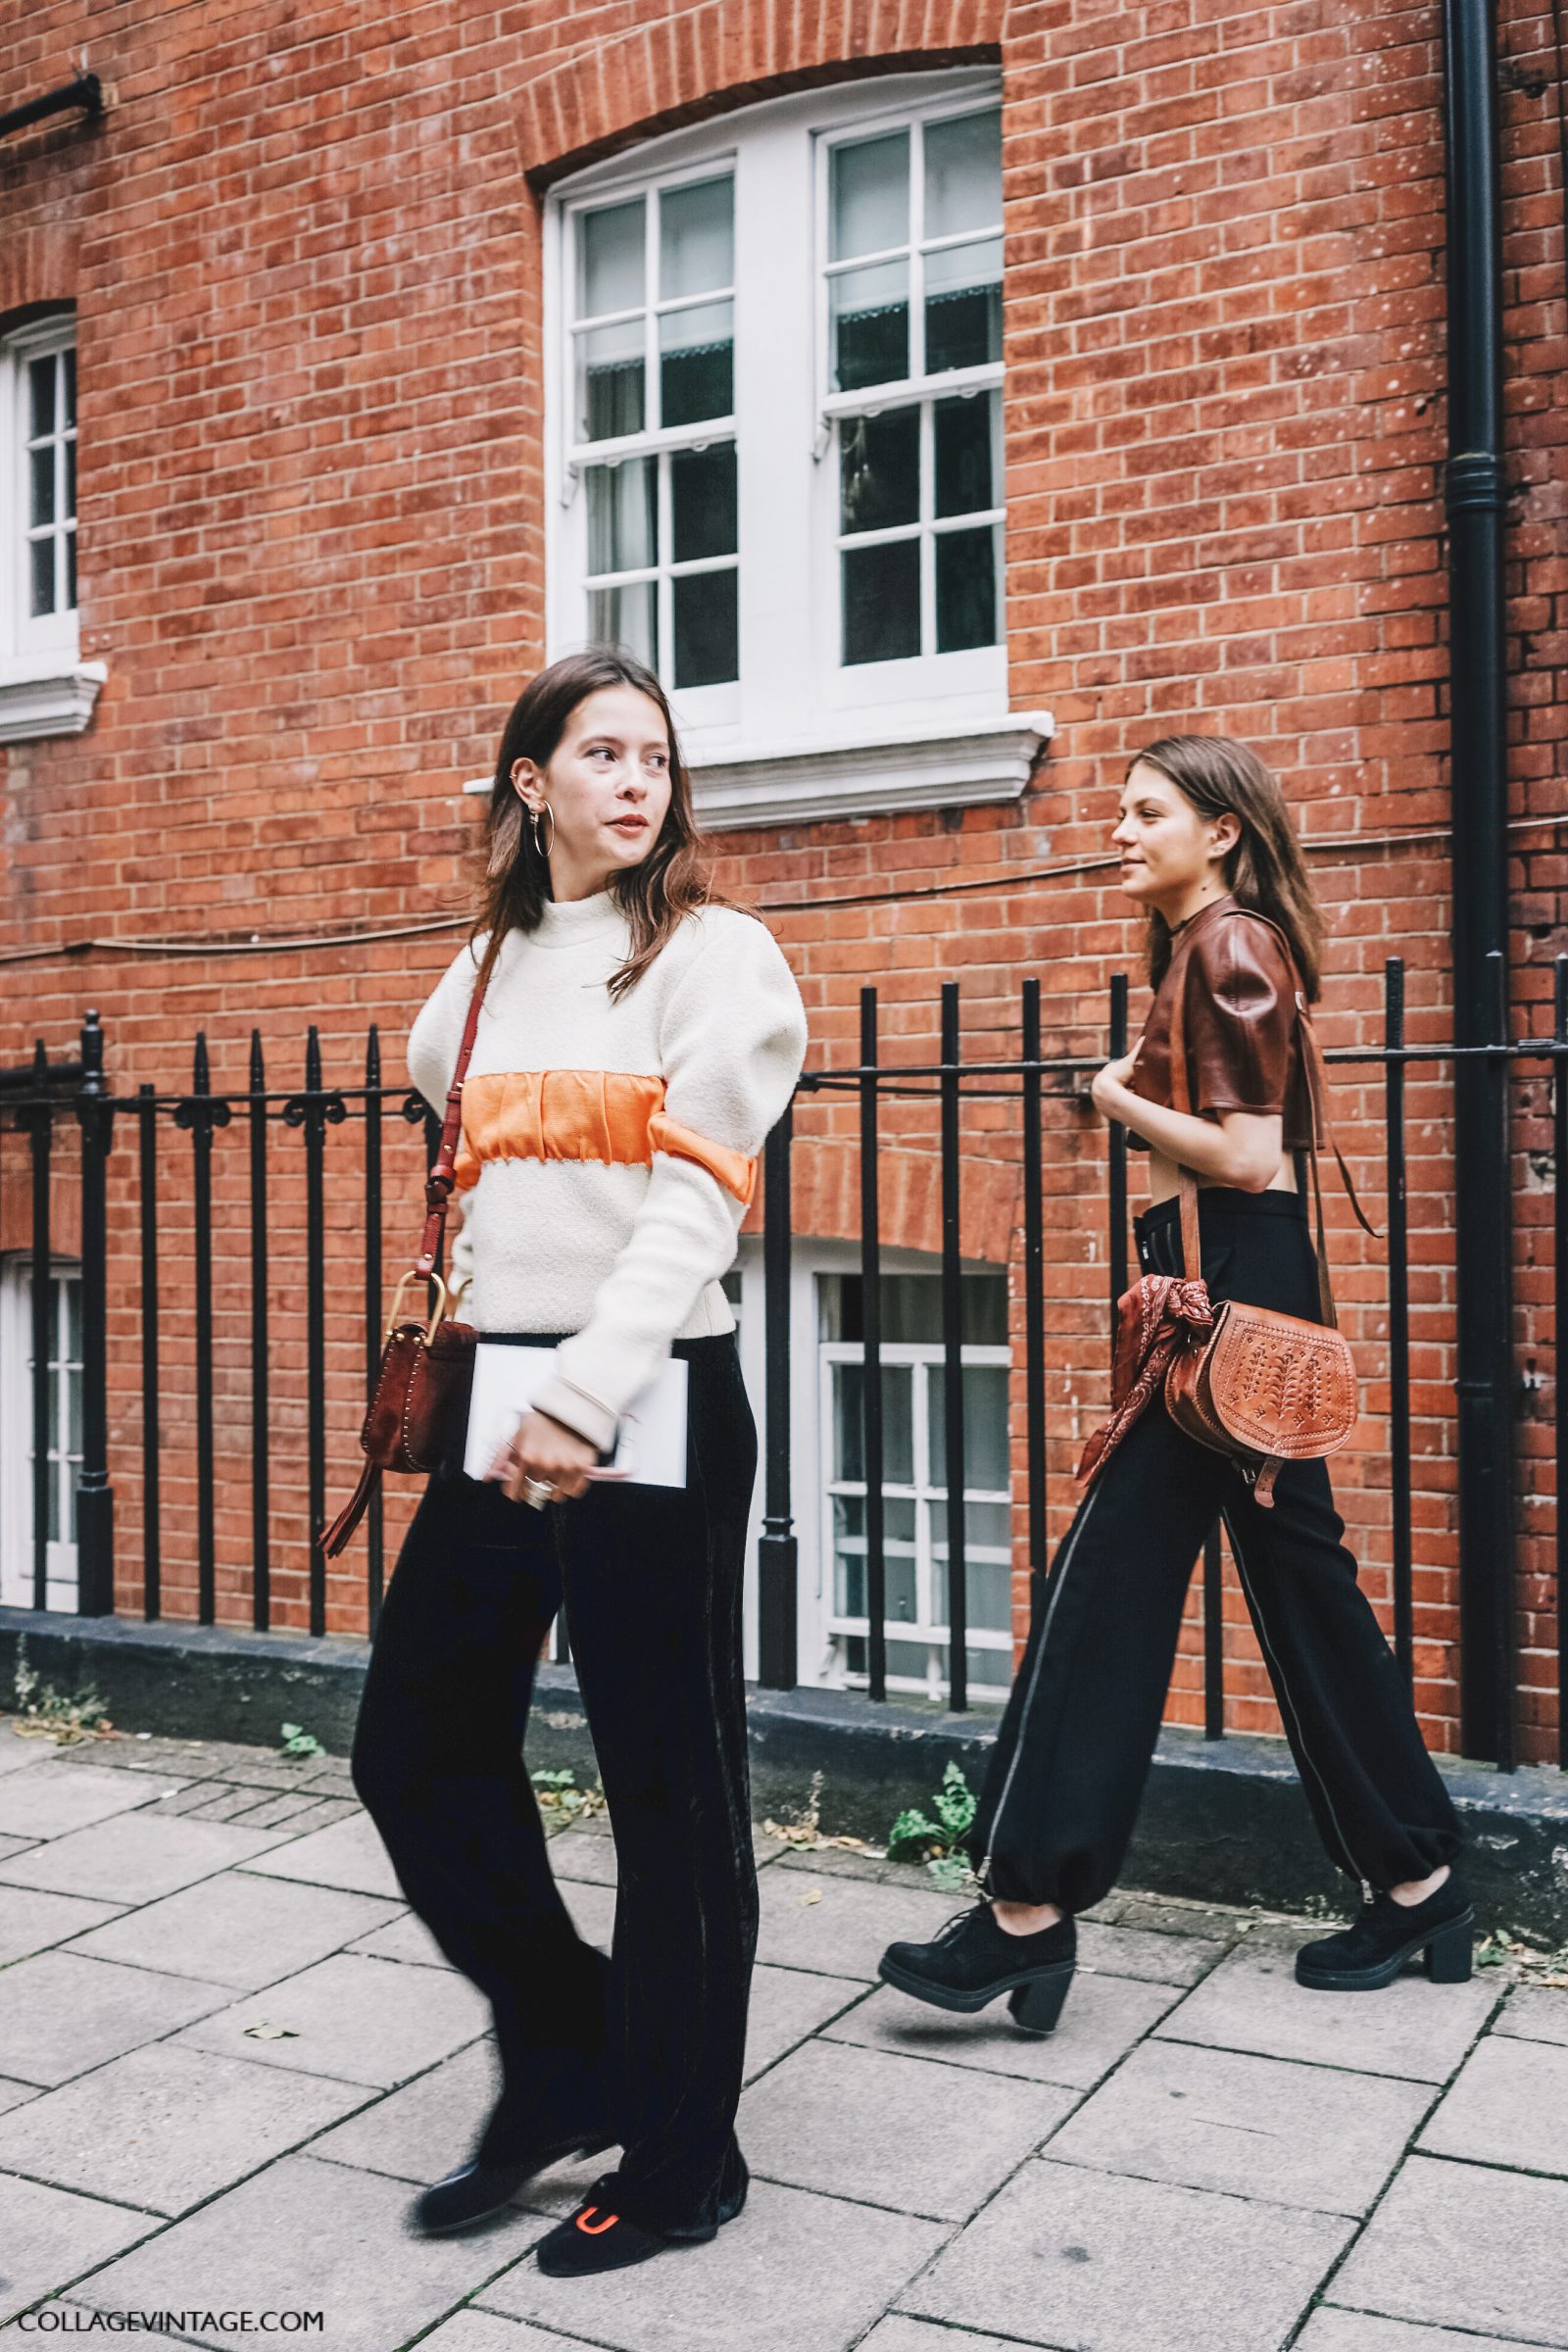 lfw-london_fashion_week_ss17-street_style-outfits-collage_vintage-vintage-jw_anderson-house_of_holland-241